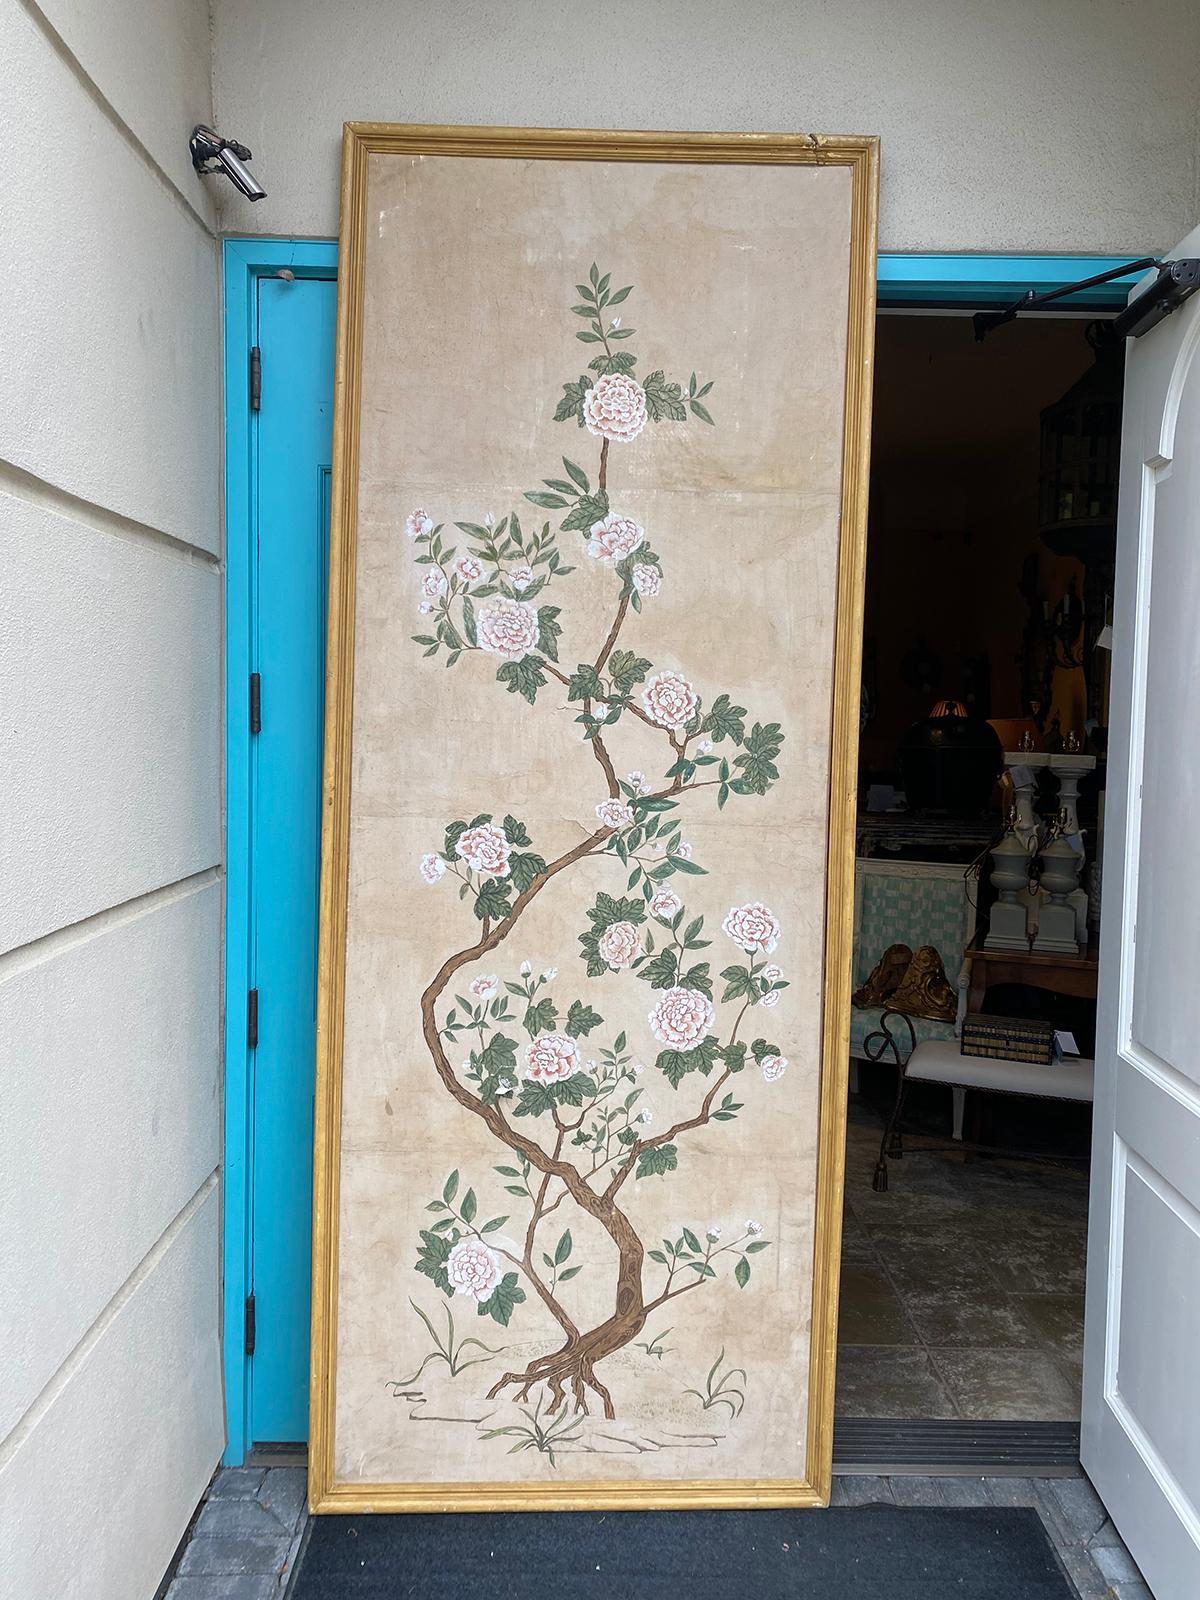 18th century Chinese wall paper panel, old frame
Spots to be touched up. Frame to be repaired. See additional photos.